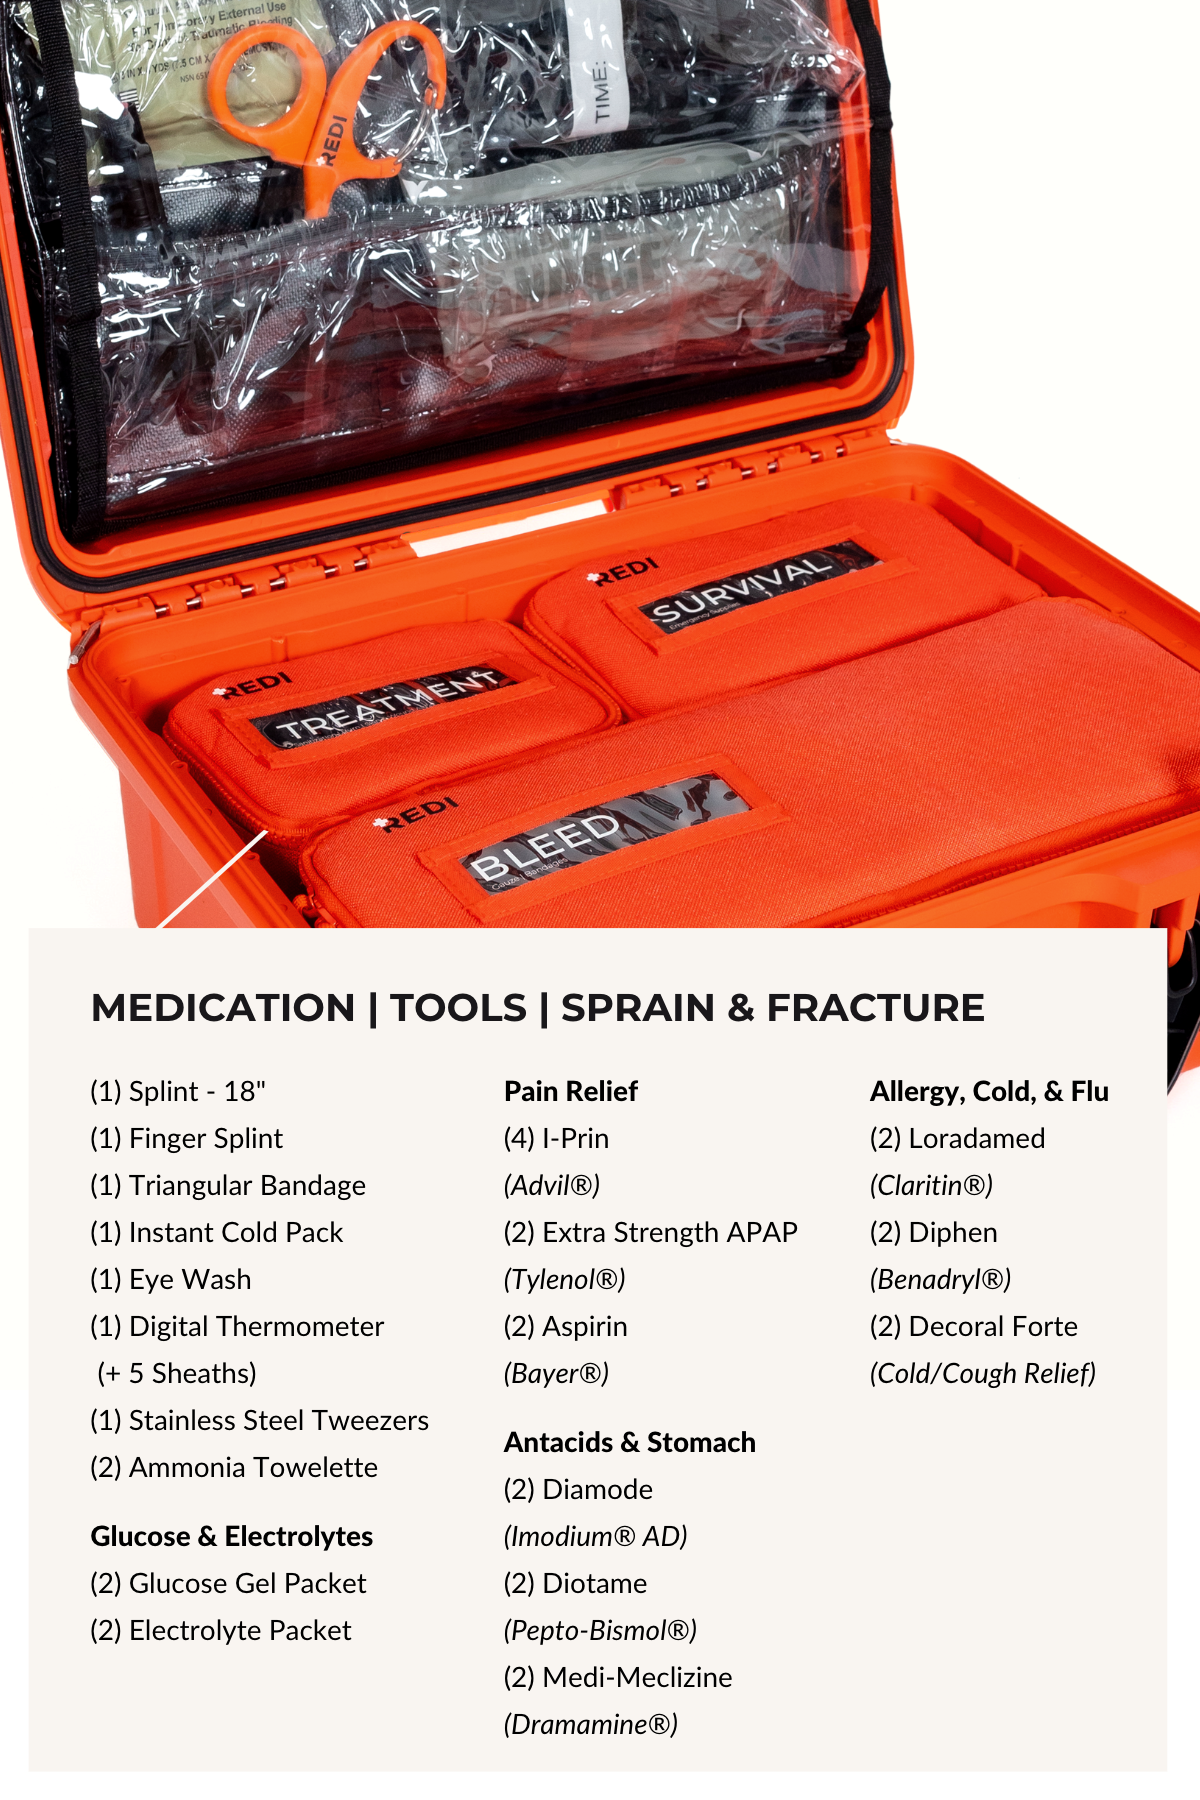 Medication, Tools, Sprain & Fracture Pouch Contents